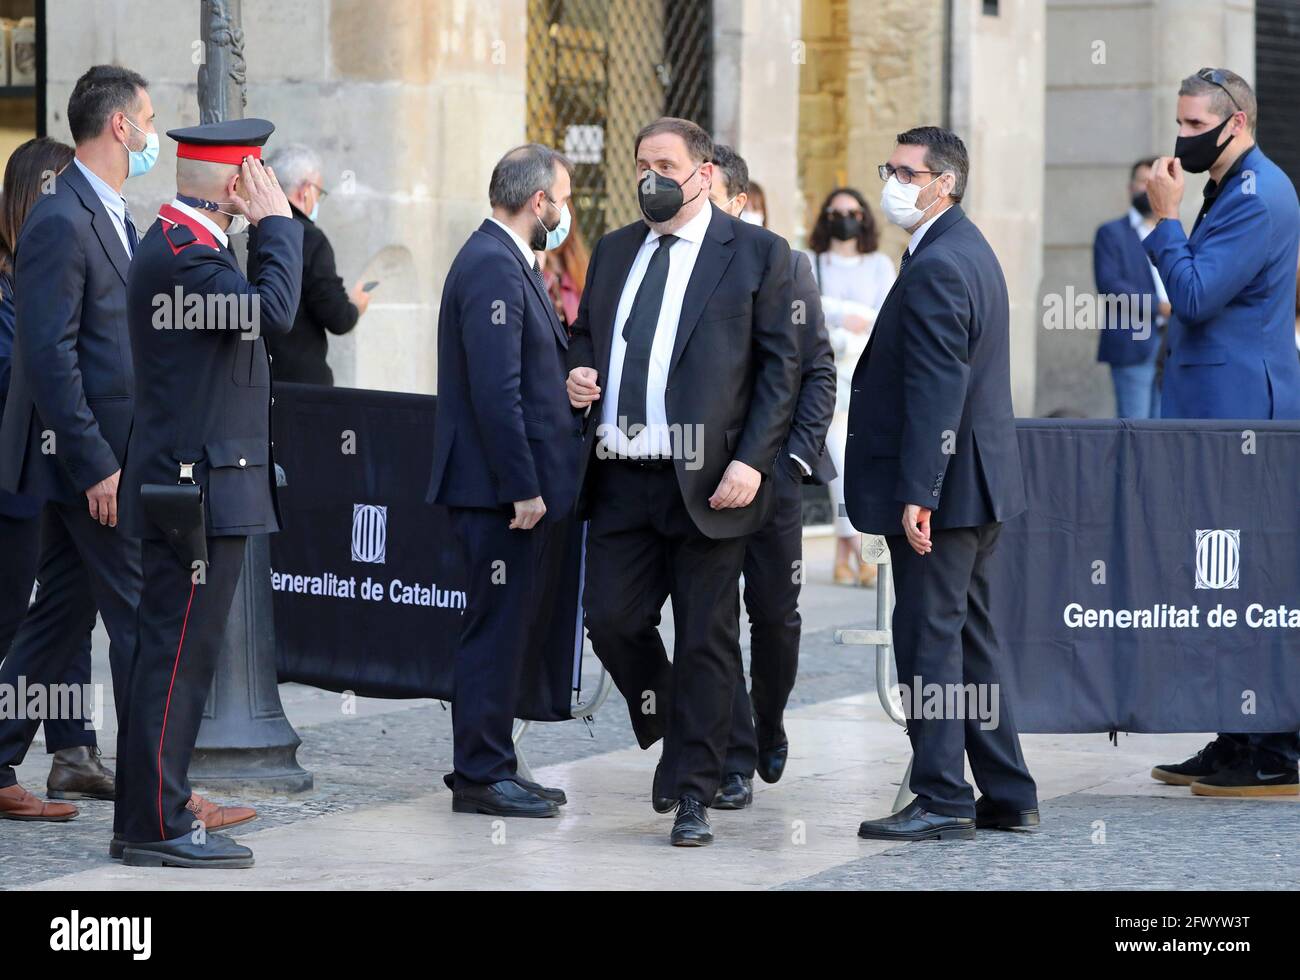 Barcelona, Spain. 24th May, 2021. May 24, 2021, Barcelona, Catalonia, Spain: Oriol Junqueras Former President Quim Torra arriving at the Palau de la Generalitat to attend the proclamation of Pere Aragones as the new President of the Generalitat of Catalonia. Photo: JGS/Cordon Press. Credit: CORDON PRESS/Alamy Live News Stock Photo